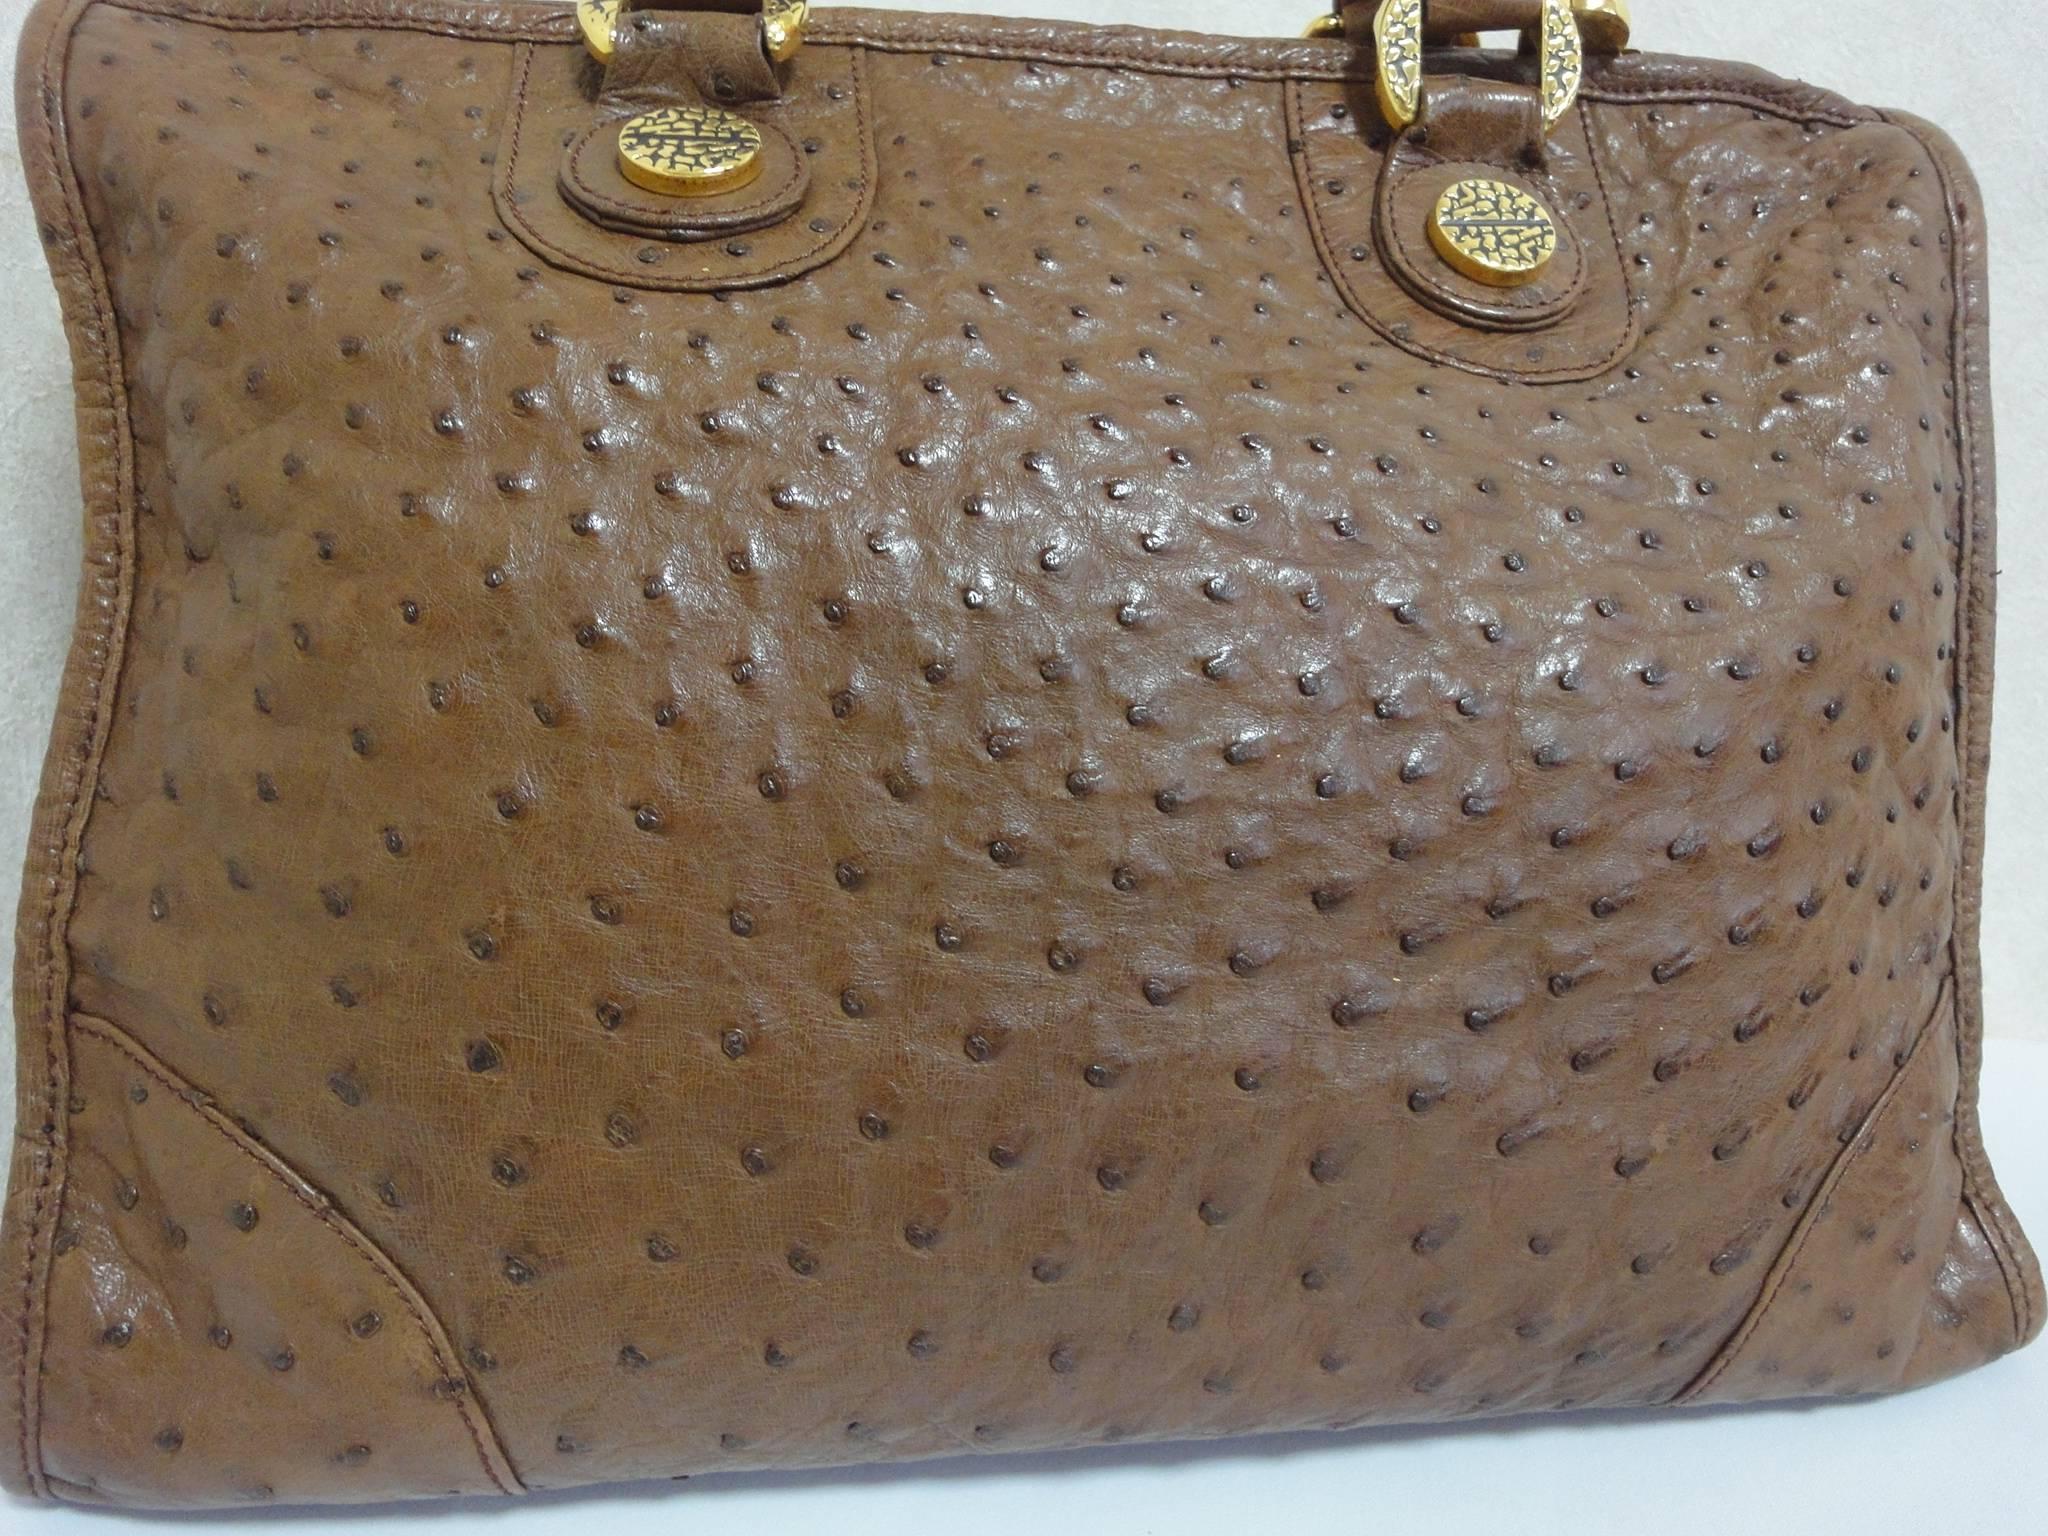 Vintage Borbonese by Red wall, genuine brown ostrich leather bag. Unisex 1